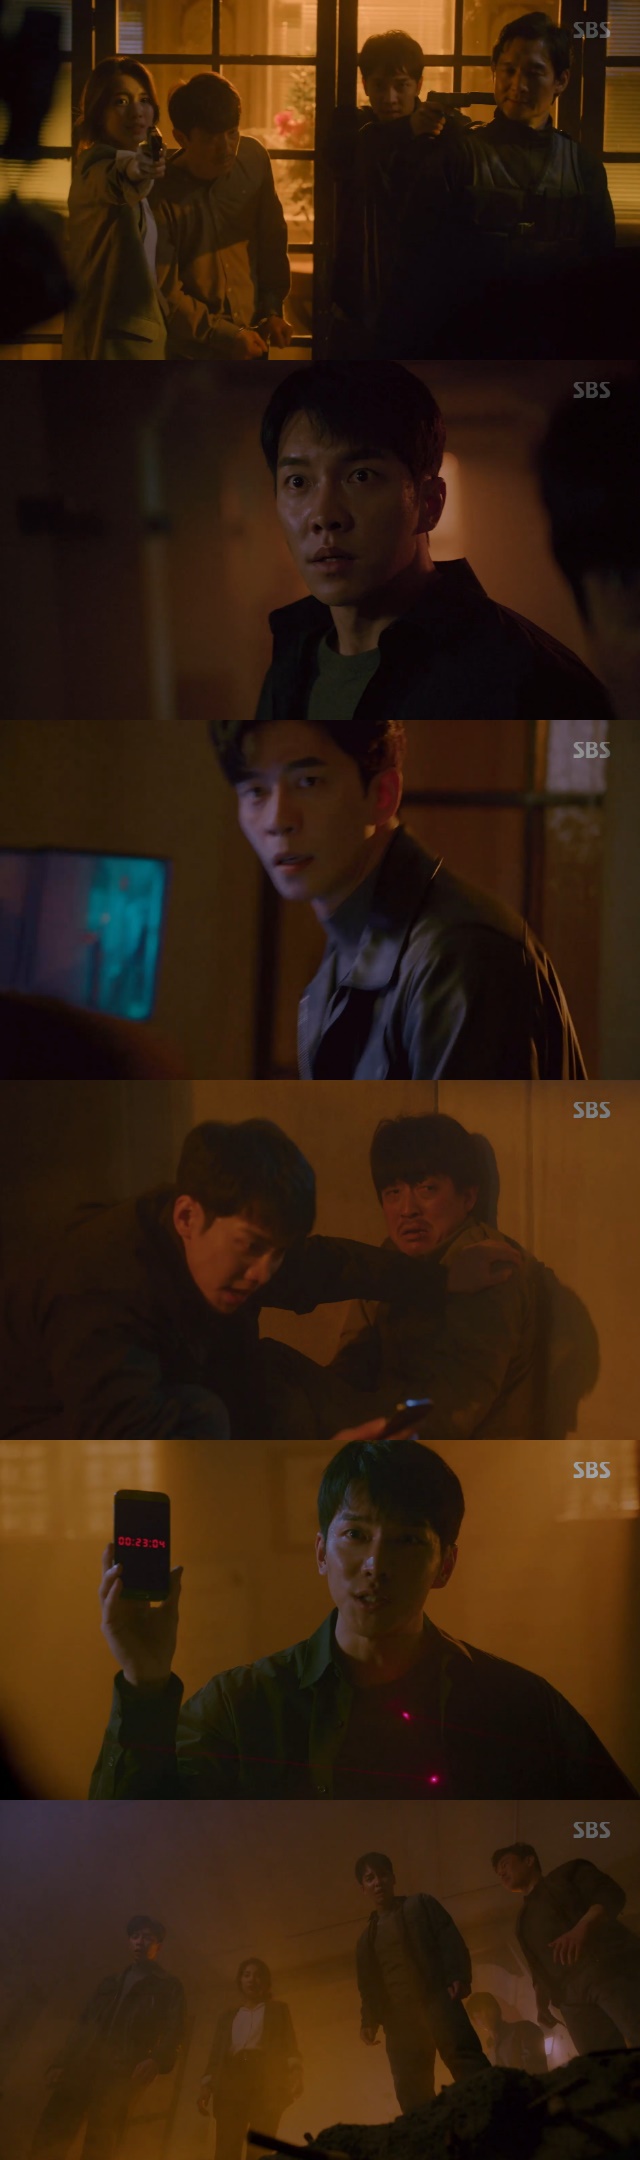 Lee Seung-gi, Bae Suzy and Shin Sung-rok saved their lives after shooting out with the NIS Assassination Group.In the 10th episode of SBSs Golden Land (playplay by Jang Young-chul, Jung Kyung-soon/directed Yoo In-sik) broadcast on October 19, NIS Assassination Group and Daechi stationed Cha Dal-gun and Go Hae-ri (played by Bae Suzy) were portrayed.Cha Dal-geon and Ko Hae-ri stationed Daechi with an ISIS Assassination group and a gun between them.Cha Dal-geon said, It is not nationality, but John Enmarksa, said the Assassination Team leader who received the Nationalitys name.These are all South Koreans, said Gohari. We are civil servants who work for the people of South Korea.Please tell him to put that gun away, but he did not listen.Ki Tae-woong (Shin Sung-rok), who watched this through CCTV, helped them by taking out the electric circuit breaker and then shooting out with the Assassination group chasing after the confession and the car.Lee Ha-na